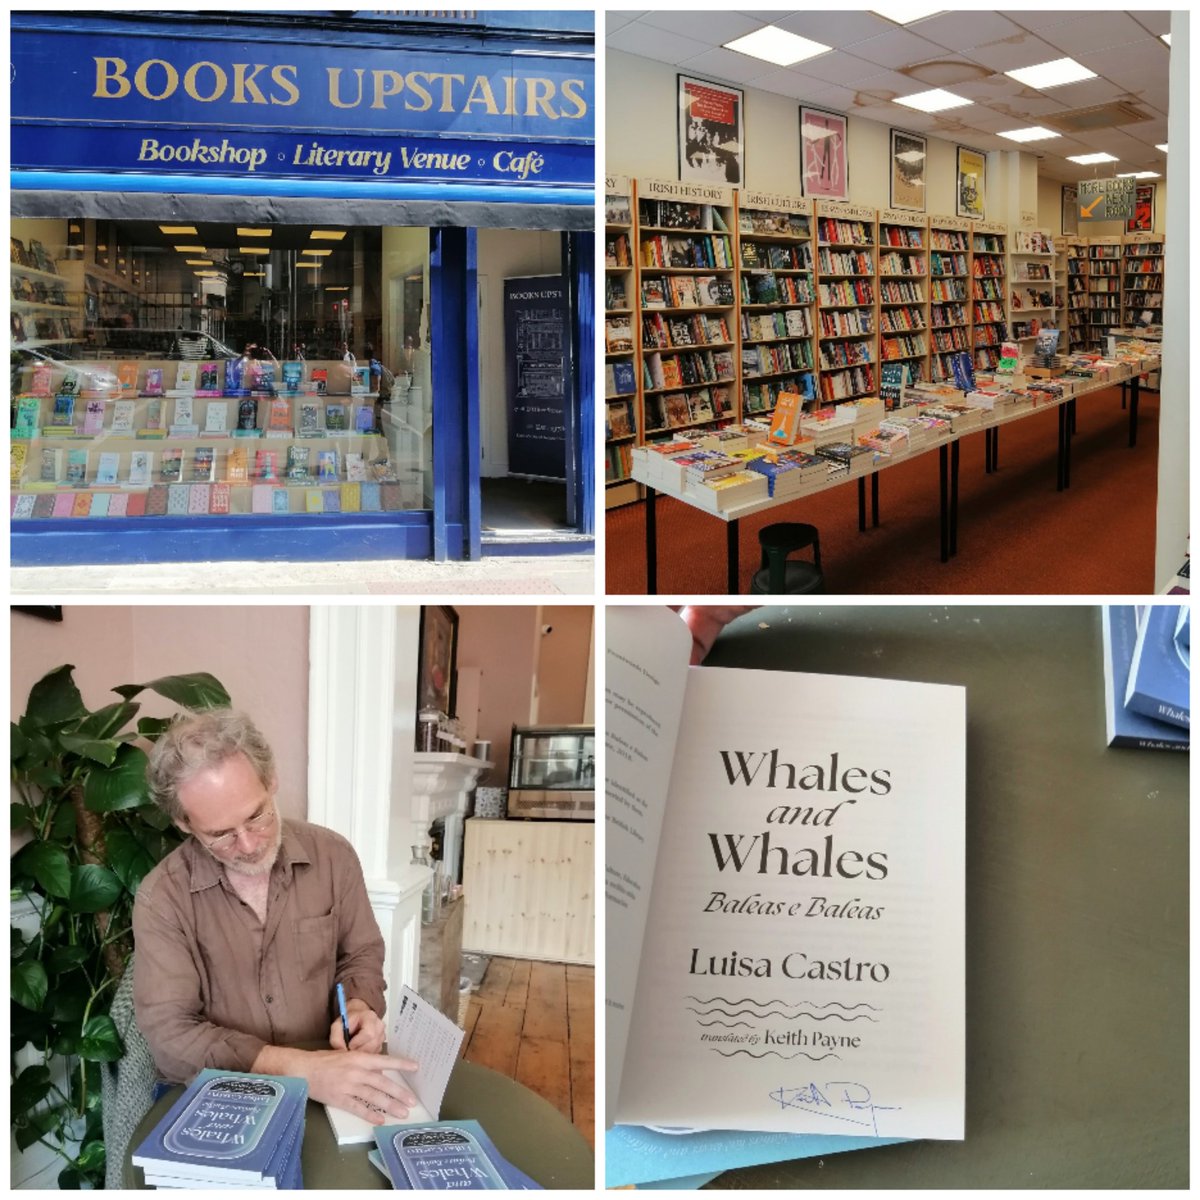 #KeithPayne hard at work signing copies of 'Whales and Whales' by #LuisaCastro that he has seamlessly translated into English. Thanks to Aisling and Louisa in @booksupstairs for their warm welcome. Pick up your signed copy and while your there, enjoy the cafe upstairs.